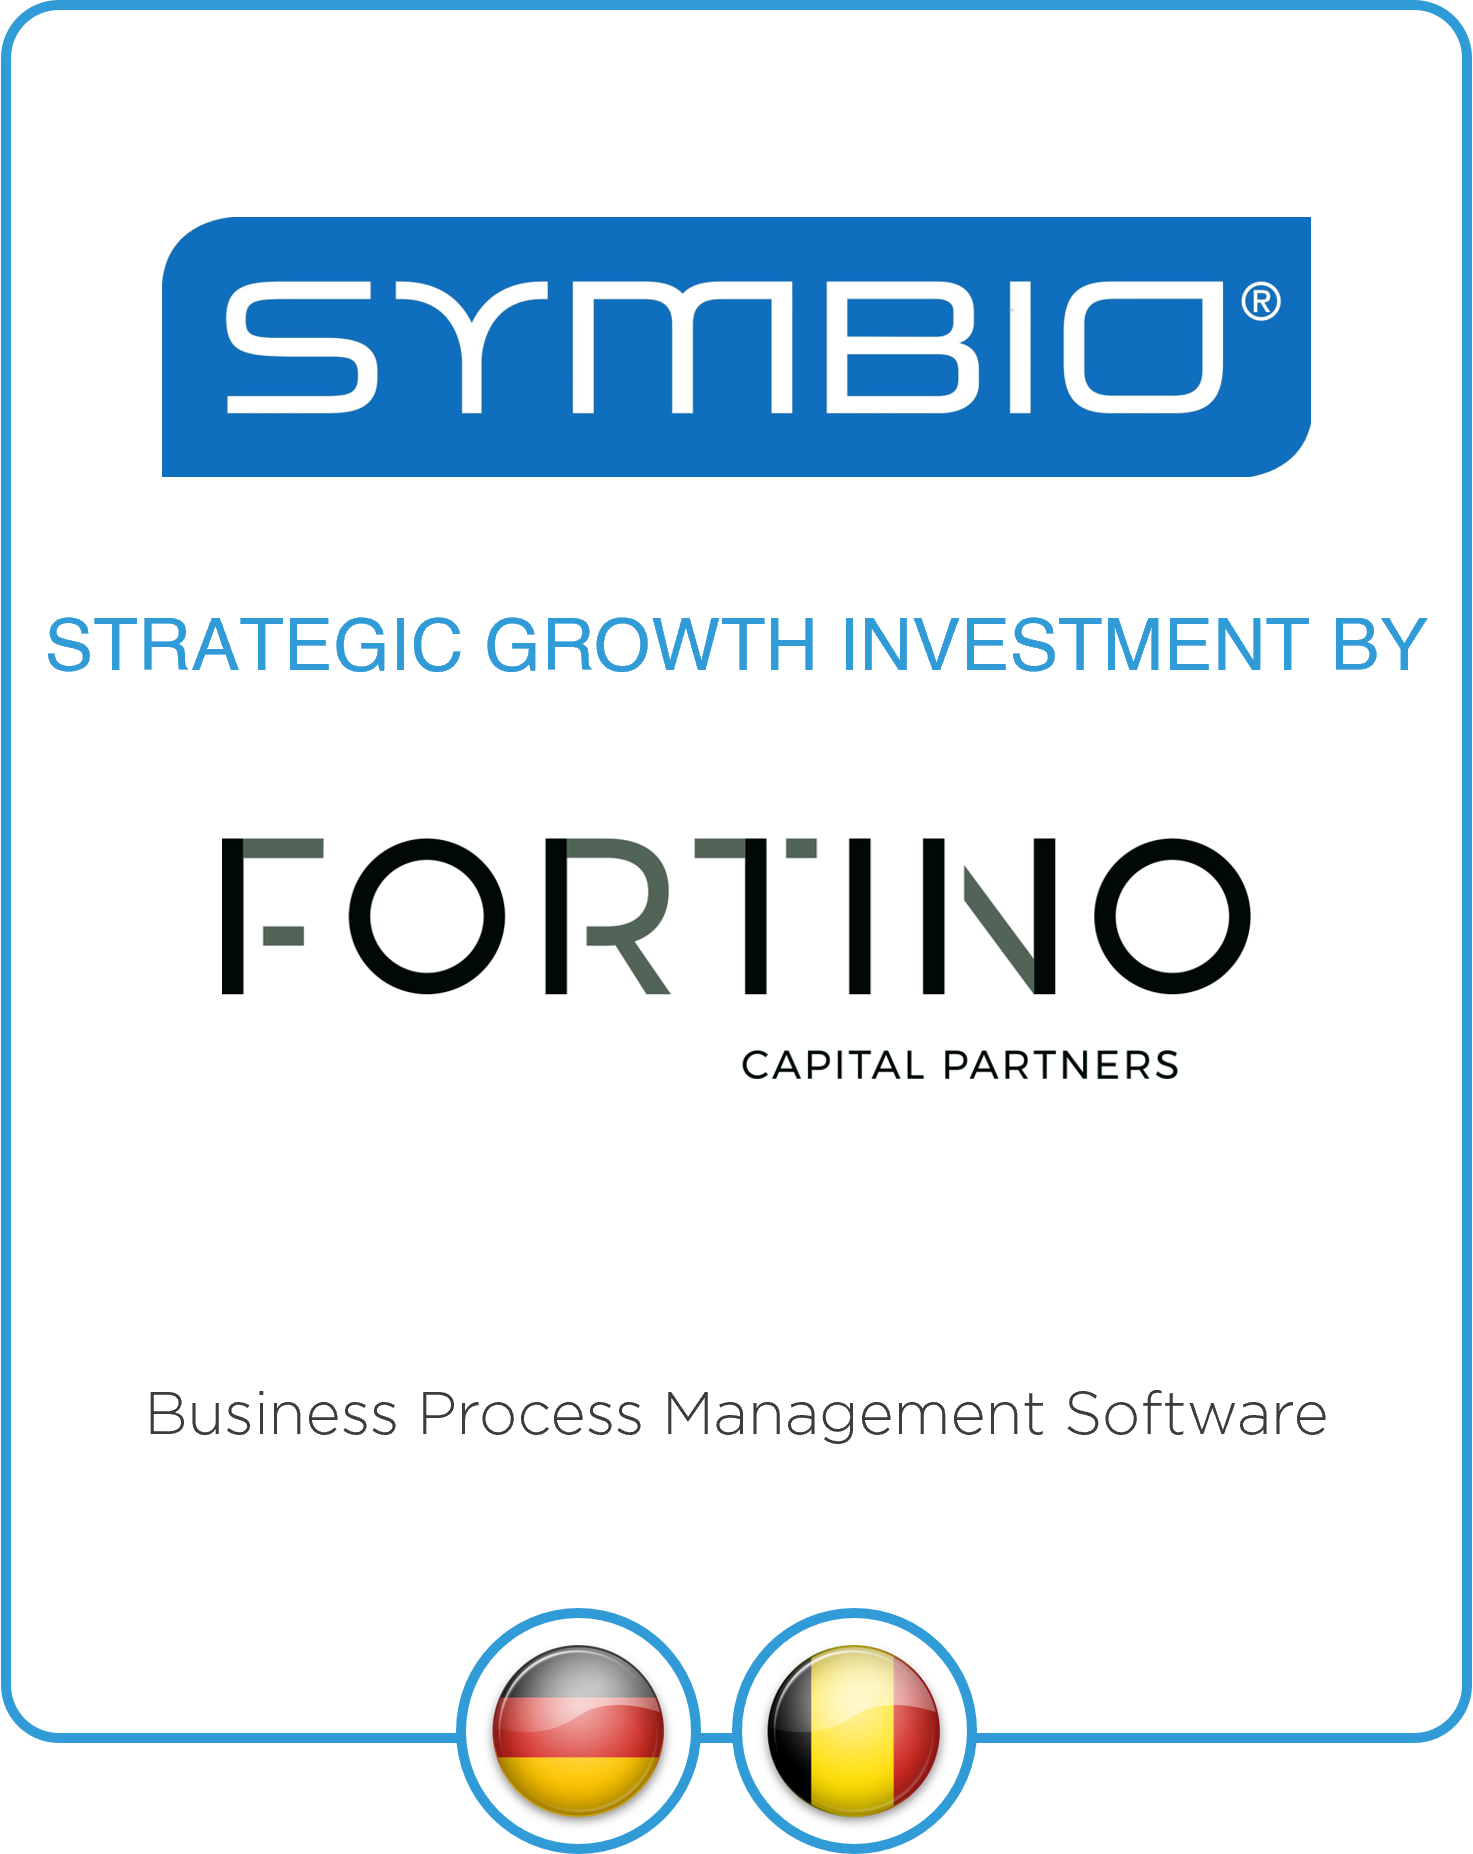 Drake Star Acts as Exclusive Financial Advisor to Symbioworld on the Strategic Growth Investment by Fortino Capital